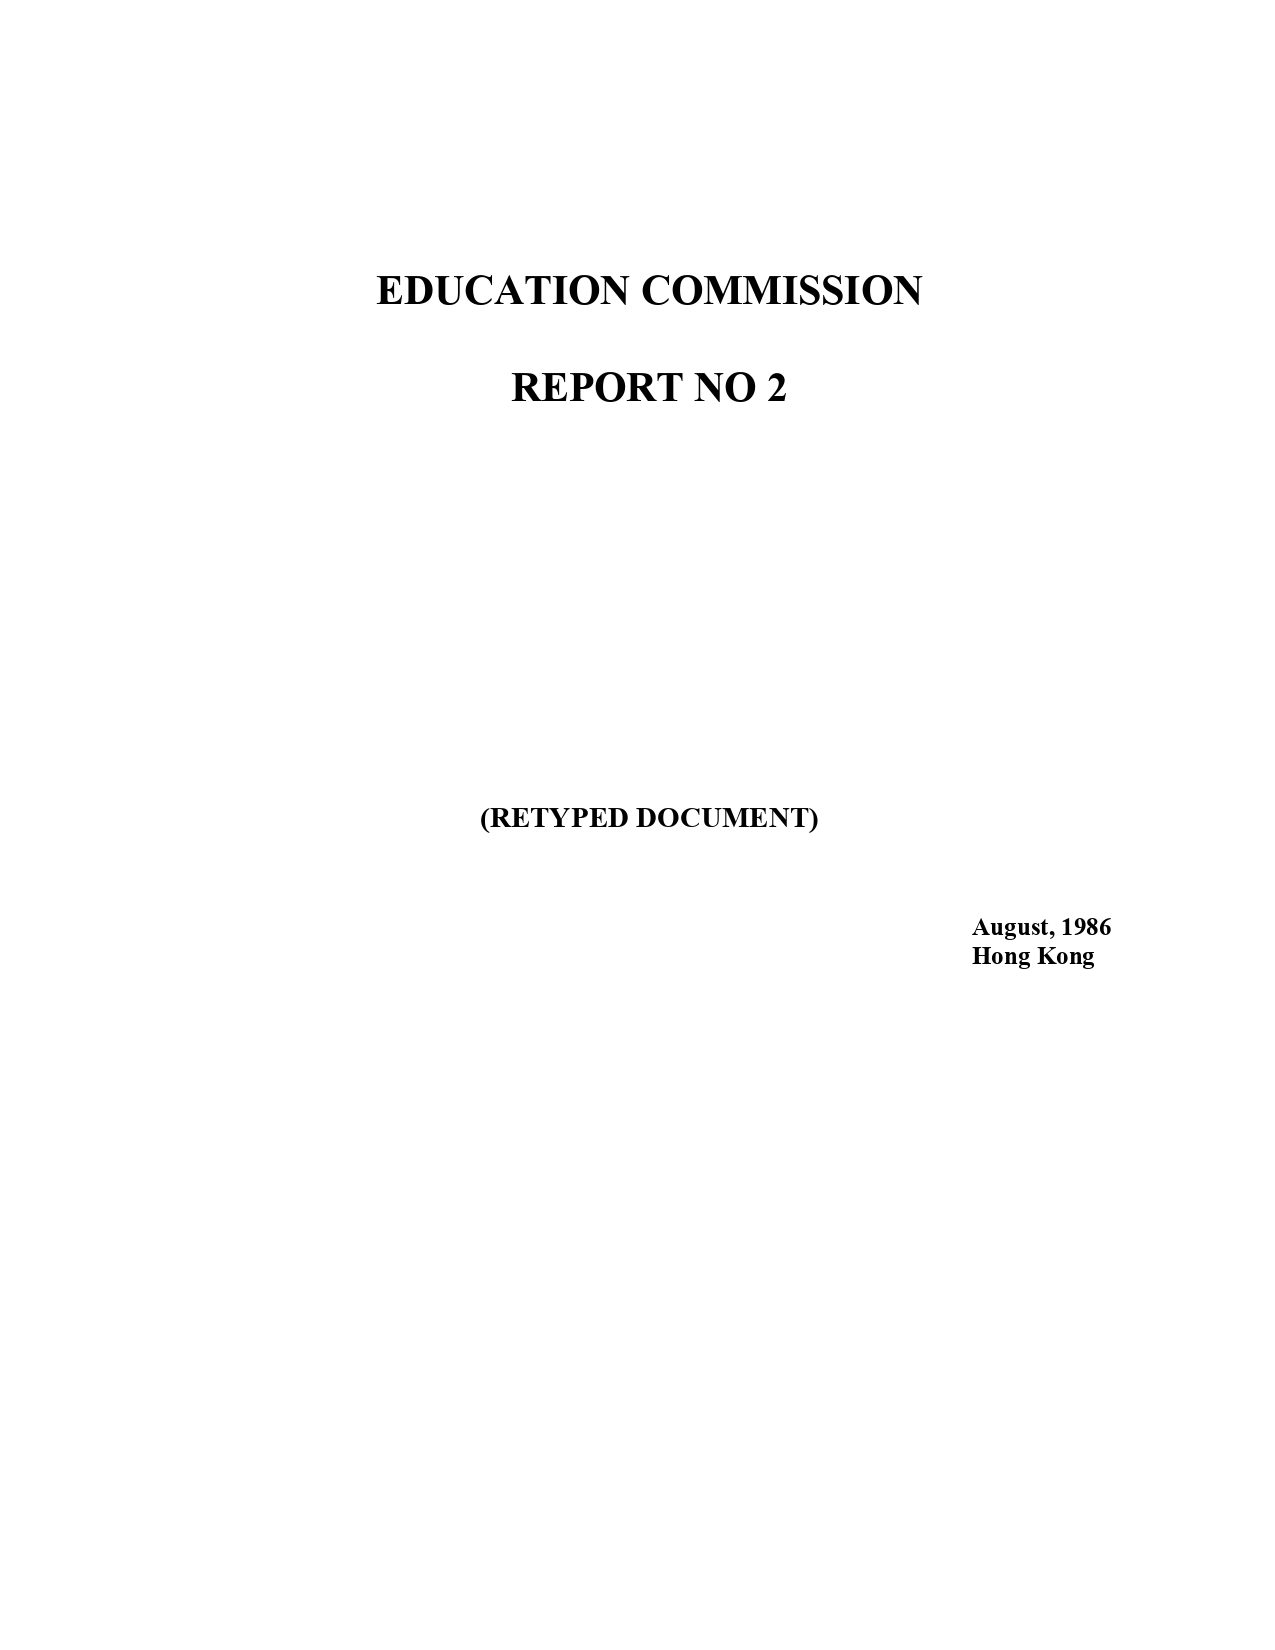 Education Commission Report No. 2